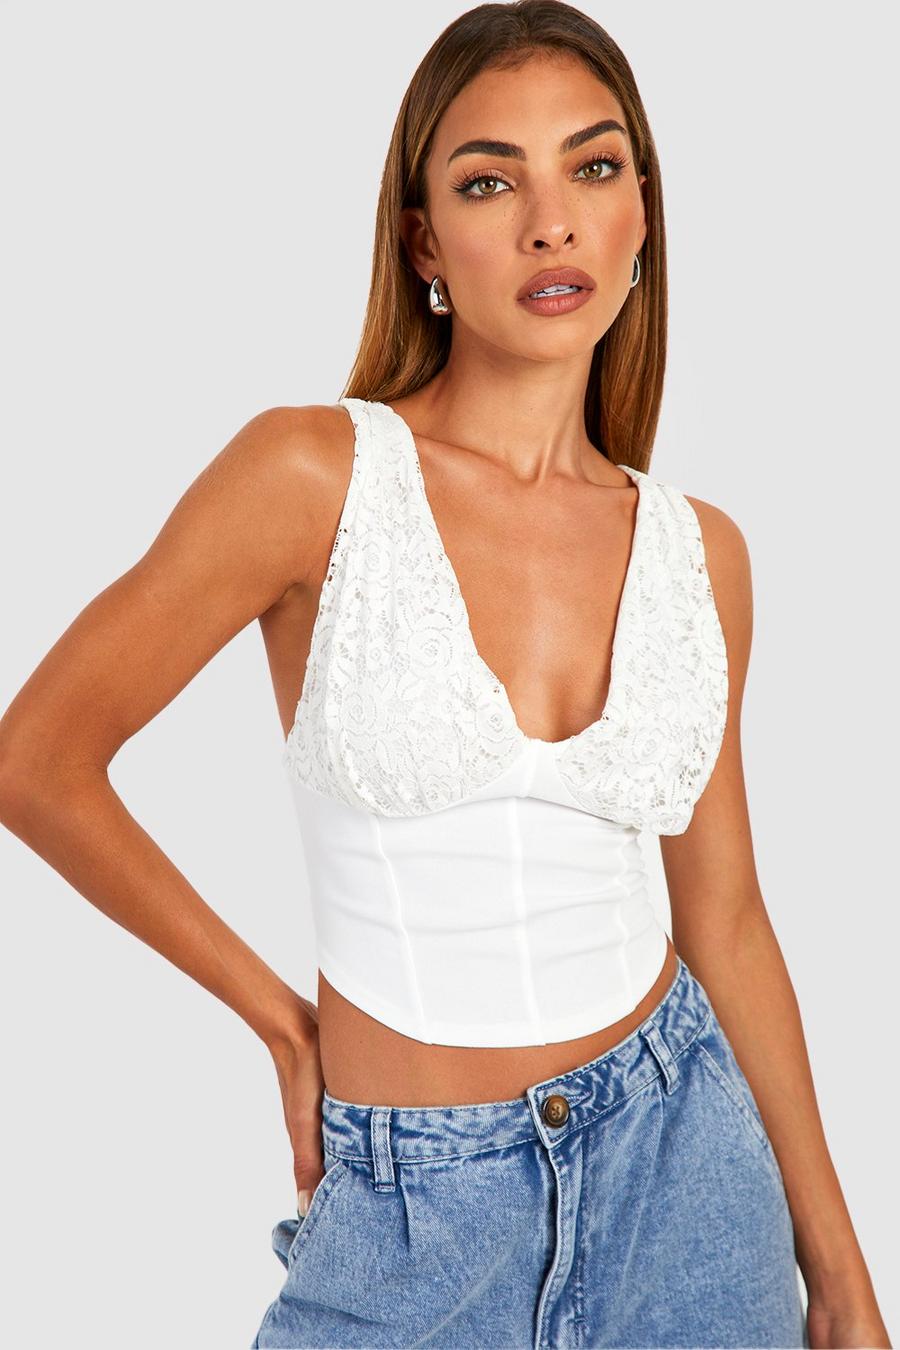 Show Off Winter Express Lace Corset Bra Top